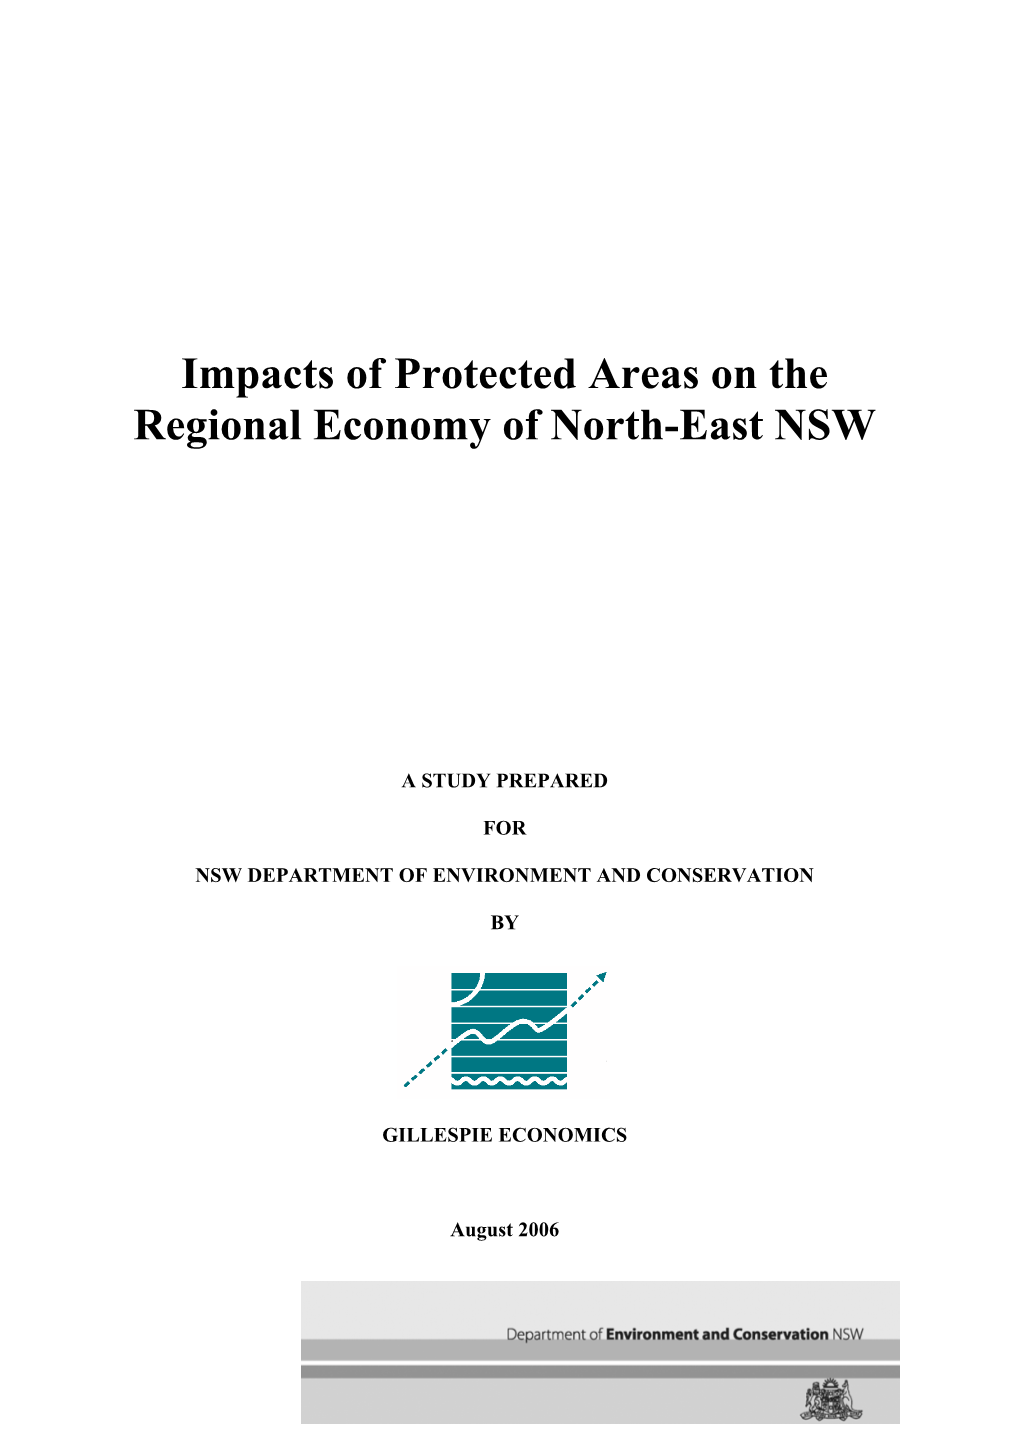 Impacts of Protected Areas on the Regional Economy of North-East NSW